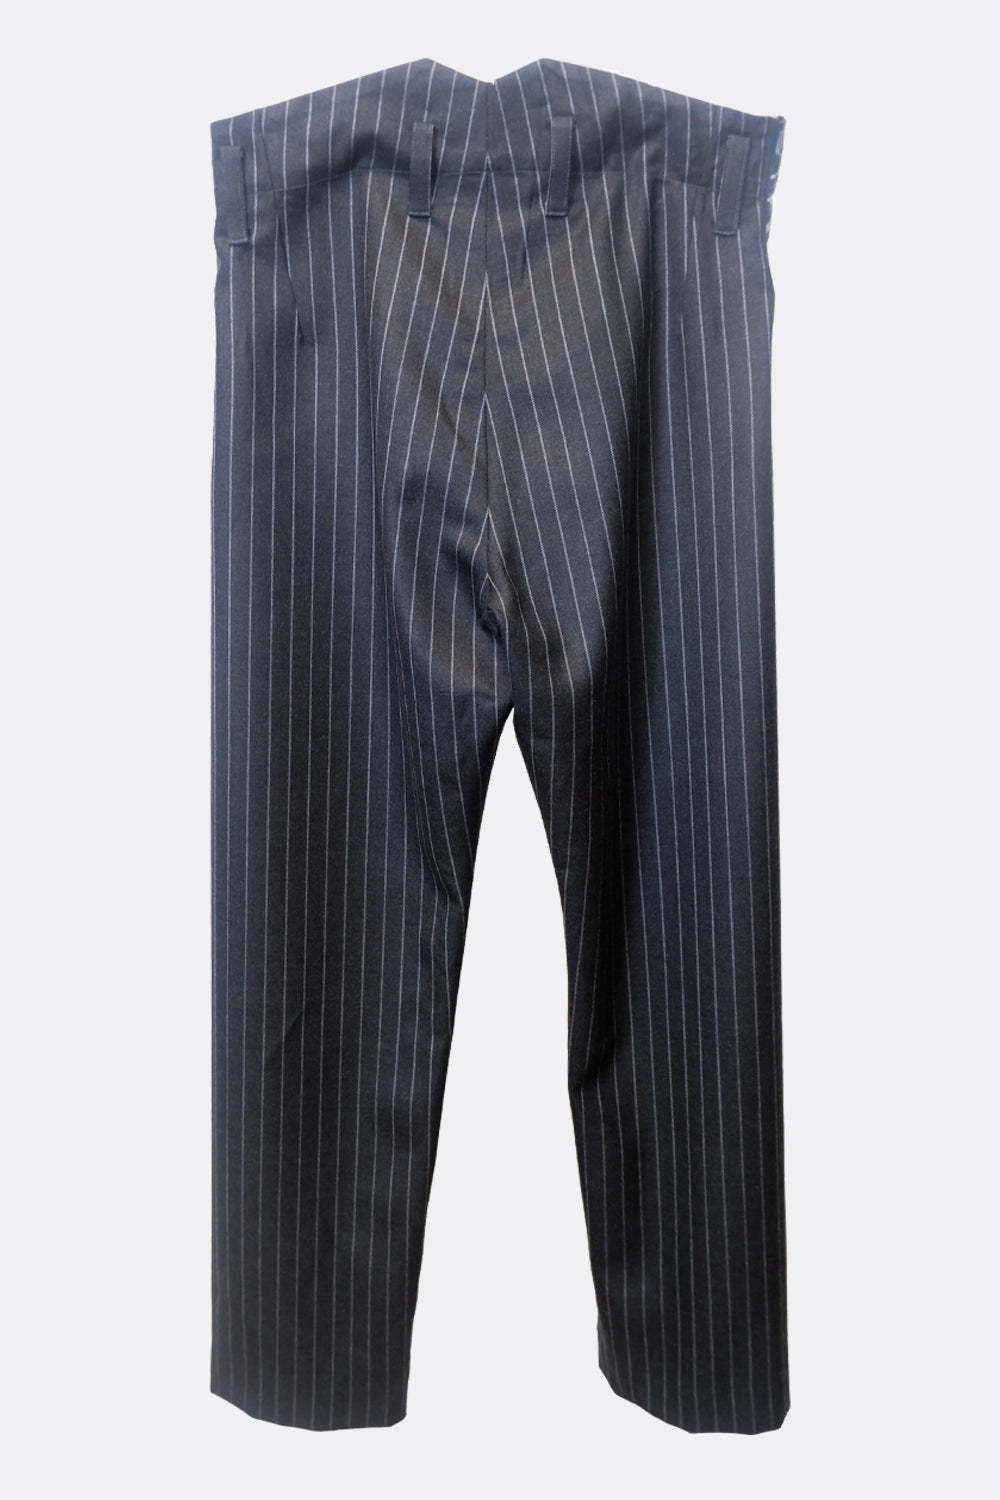 CAVALRY TROUSERS IN GREY STRIPE WITH LEOPARD CONTRAST (made to order)-menswear-A Child Of The Jago